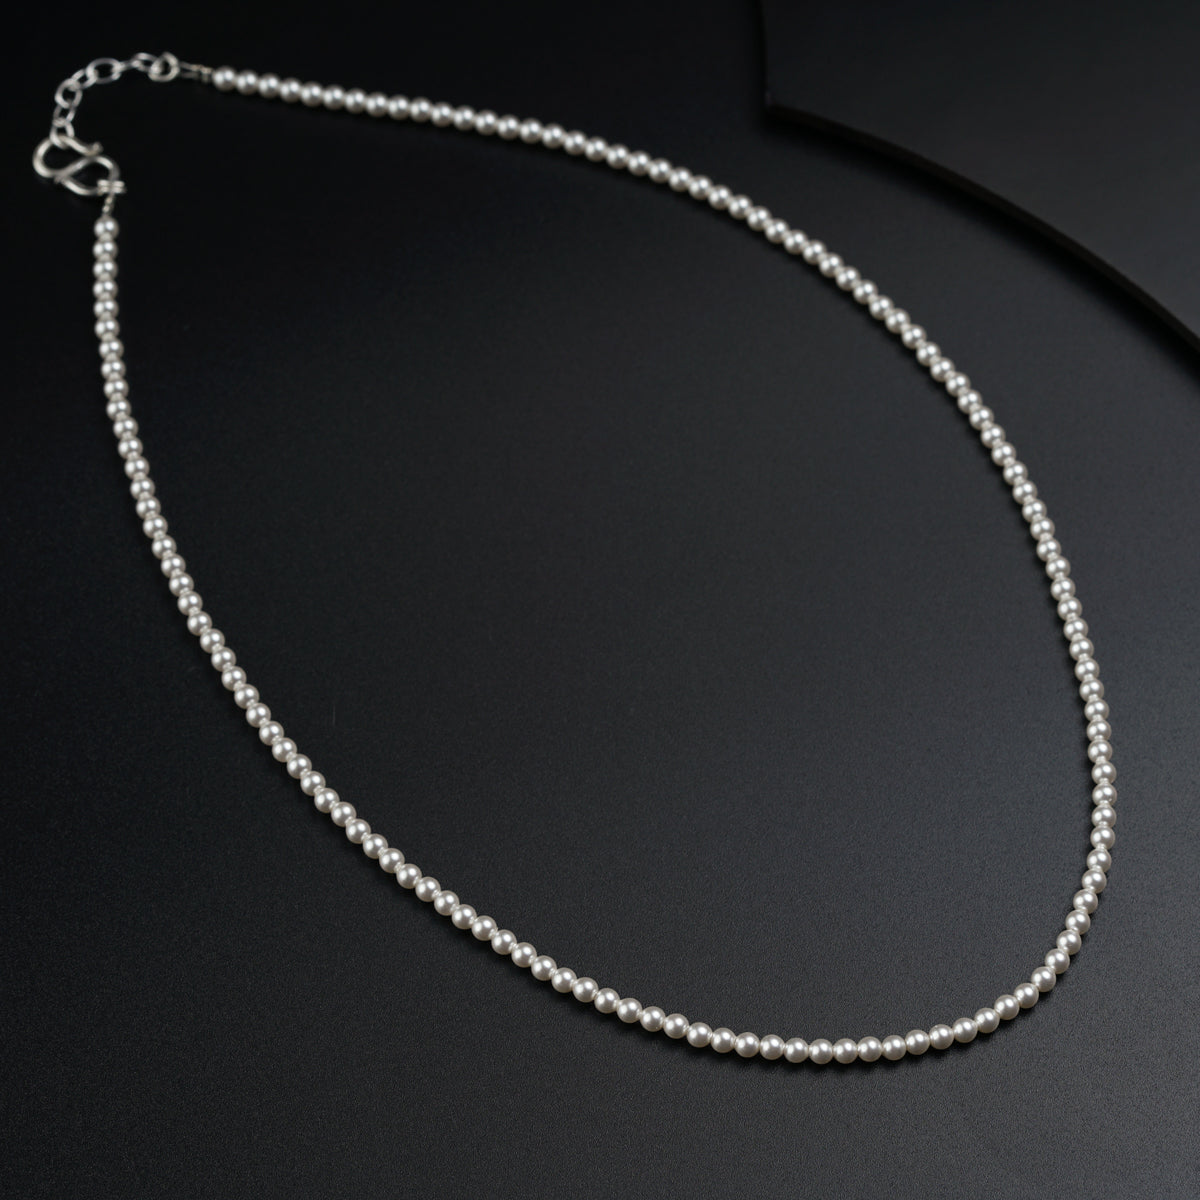 a white beaded necklace on a black surface